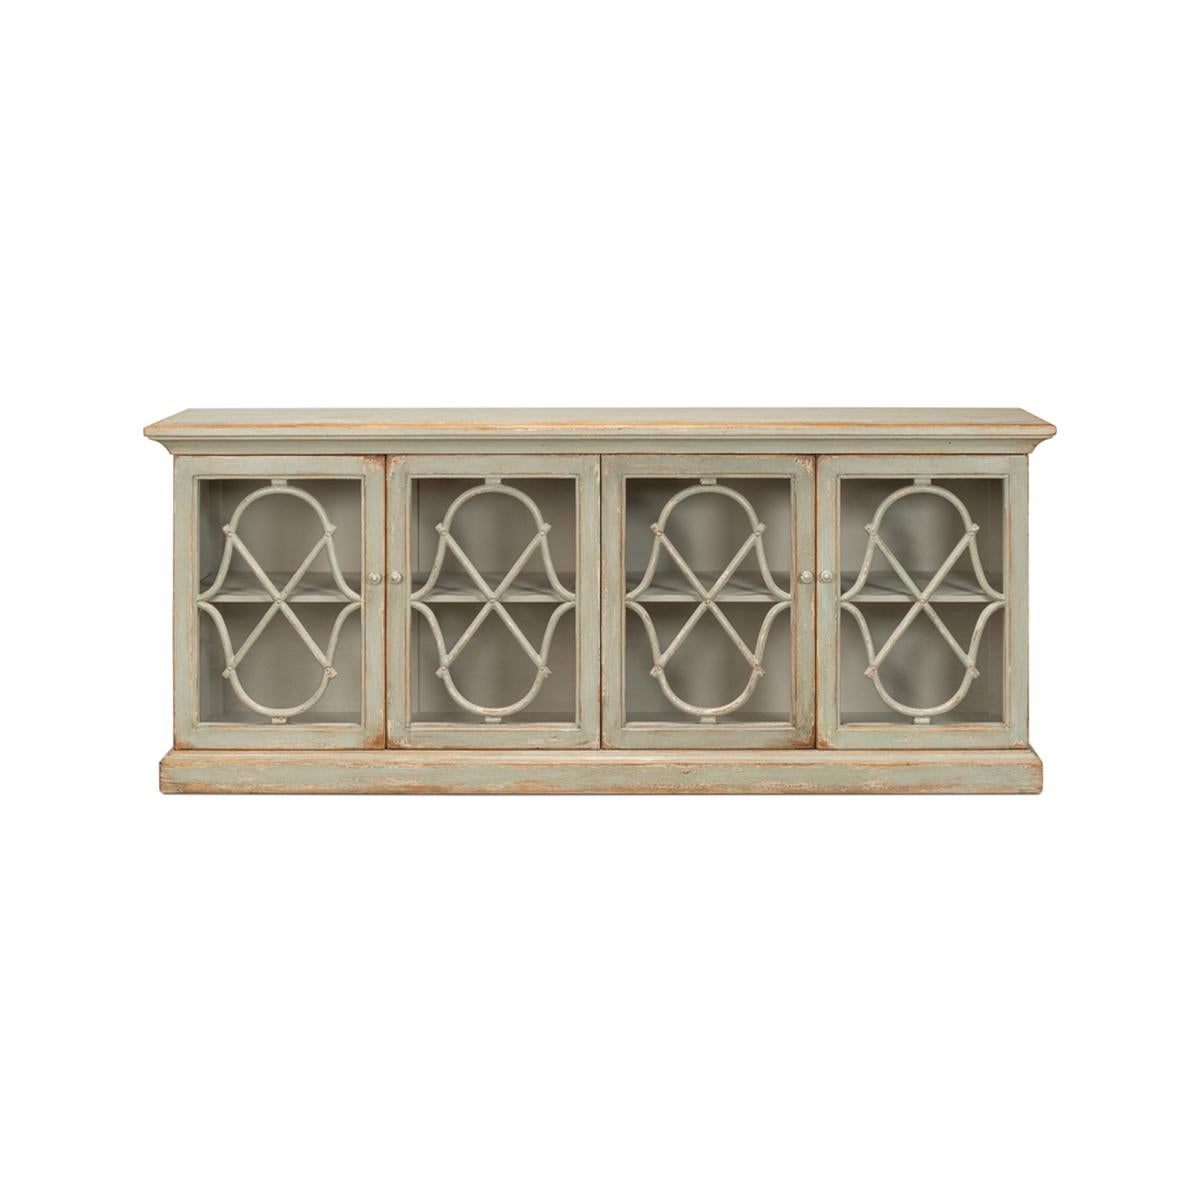 Inspired by the 19th century French antique, this reclaimed pine sideboard has an emphasis on high drama and a high function, set apart with a graceful, feminine fretwork motif.

With a flat rectangular top above four doors with openwork details in